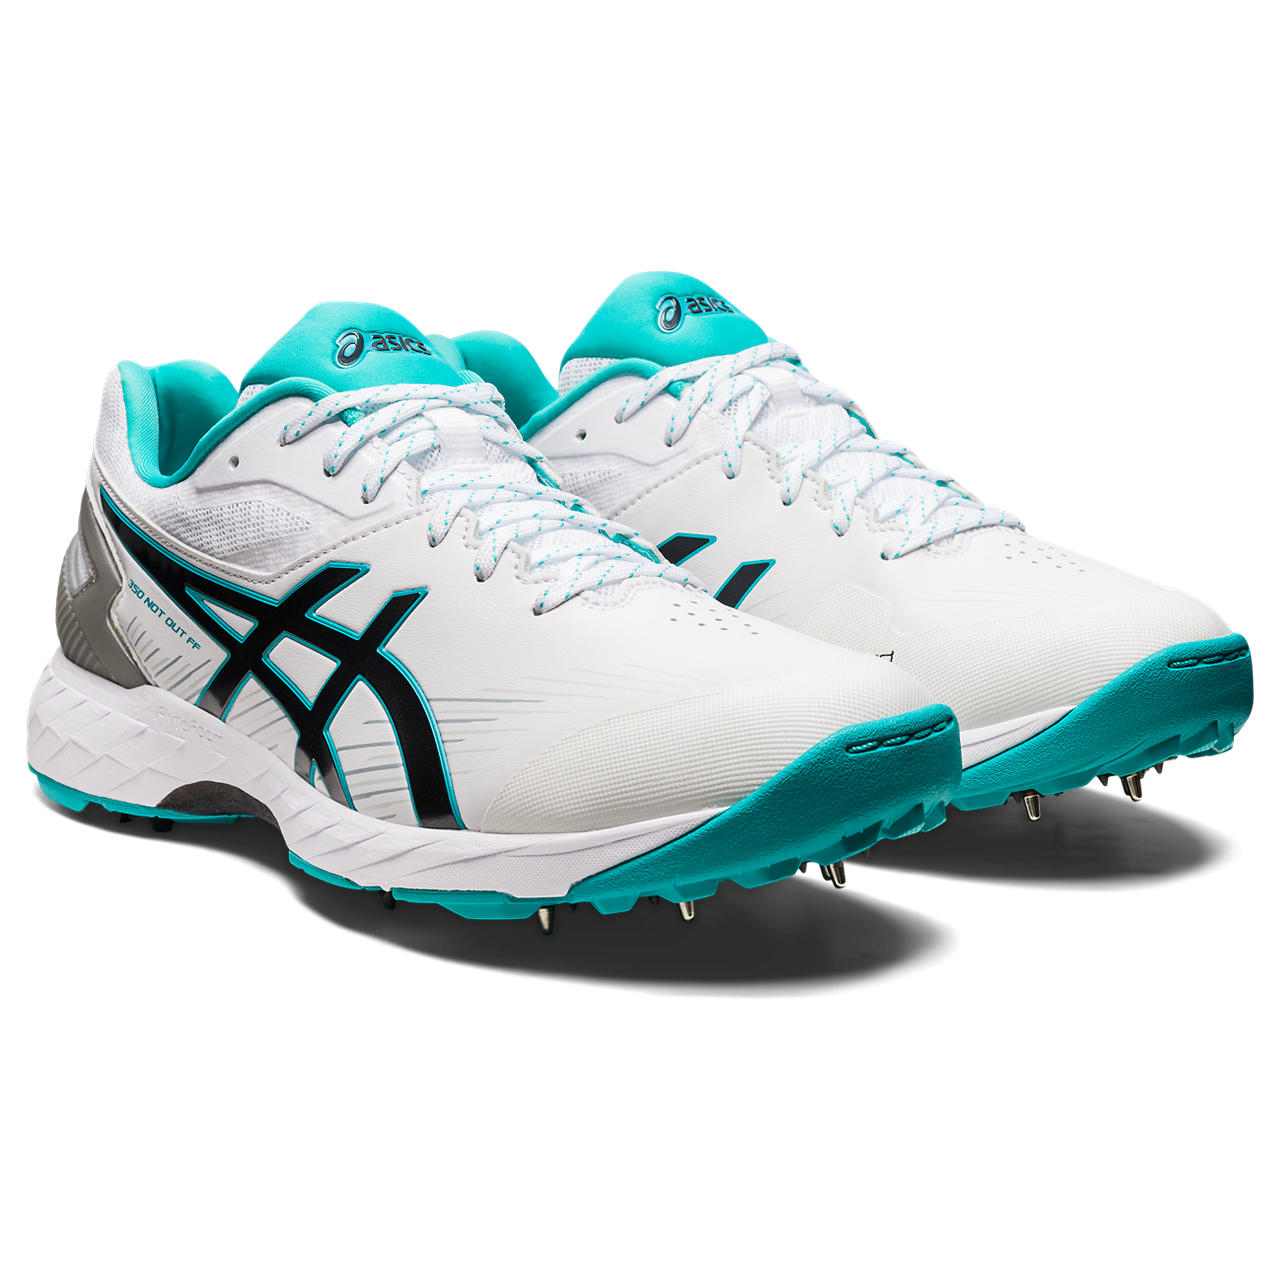 Asics Gel 350 Not Out Cricket Spikes White/Sky Blue